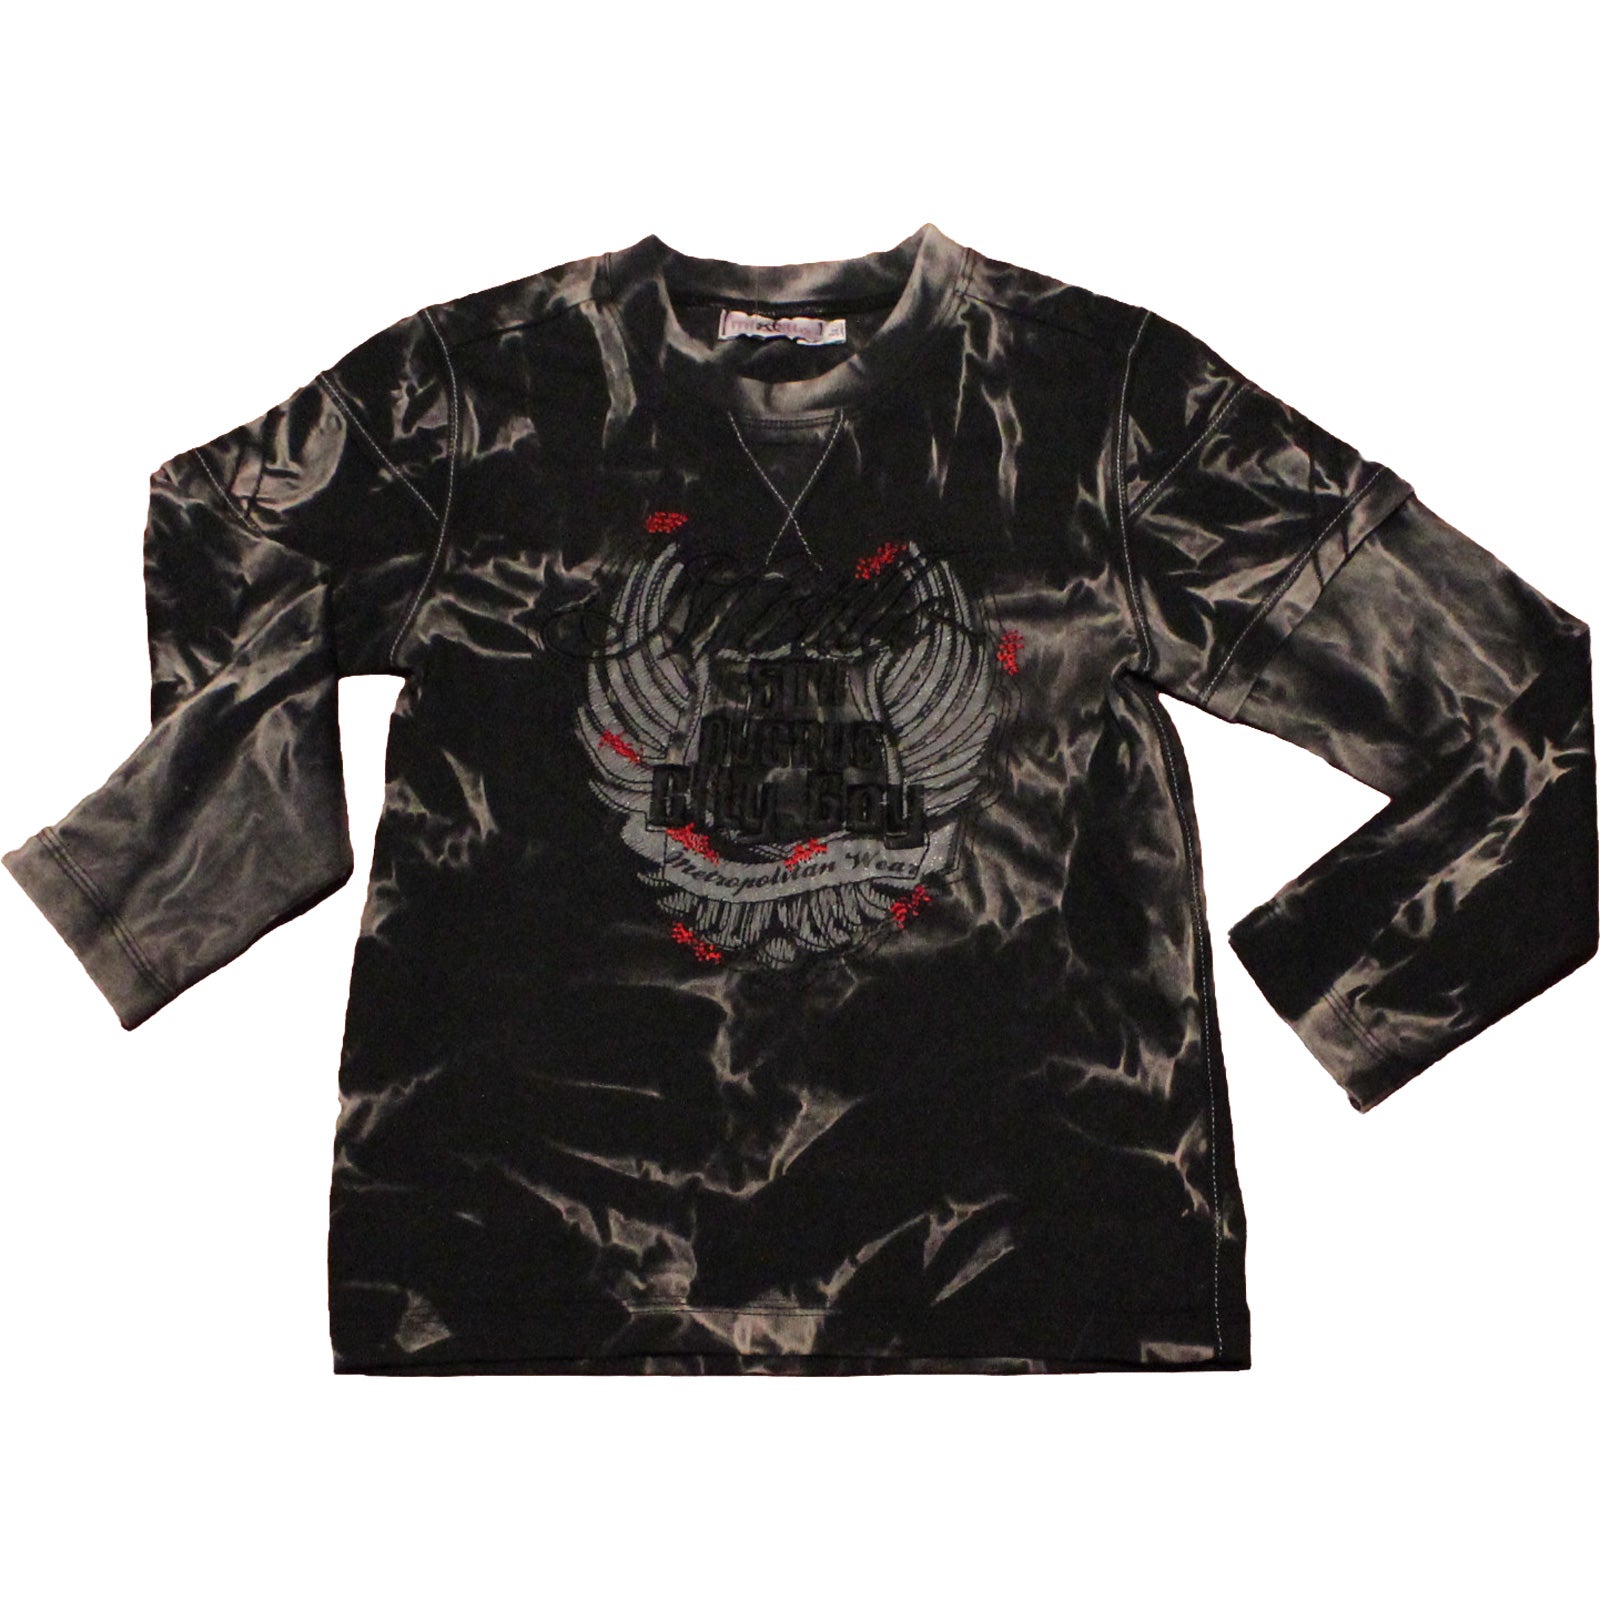 
  Long-sleeved T-shirt from the children's clothing line Mirtillo with application and embroider...